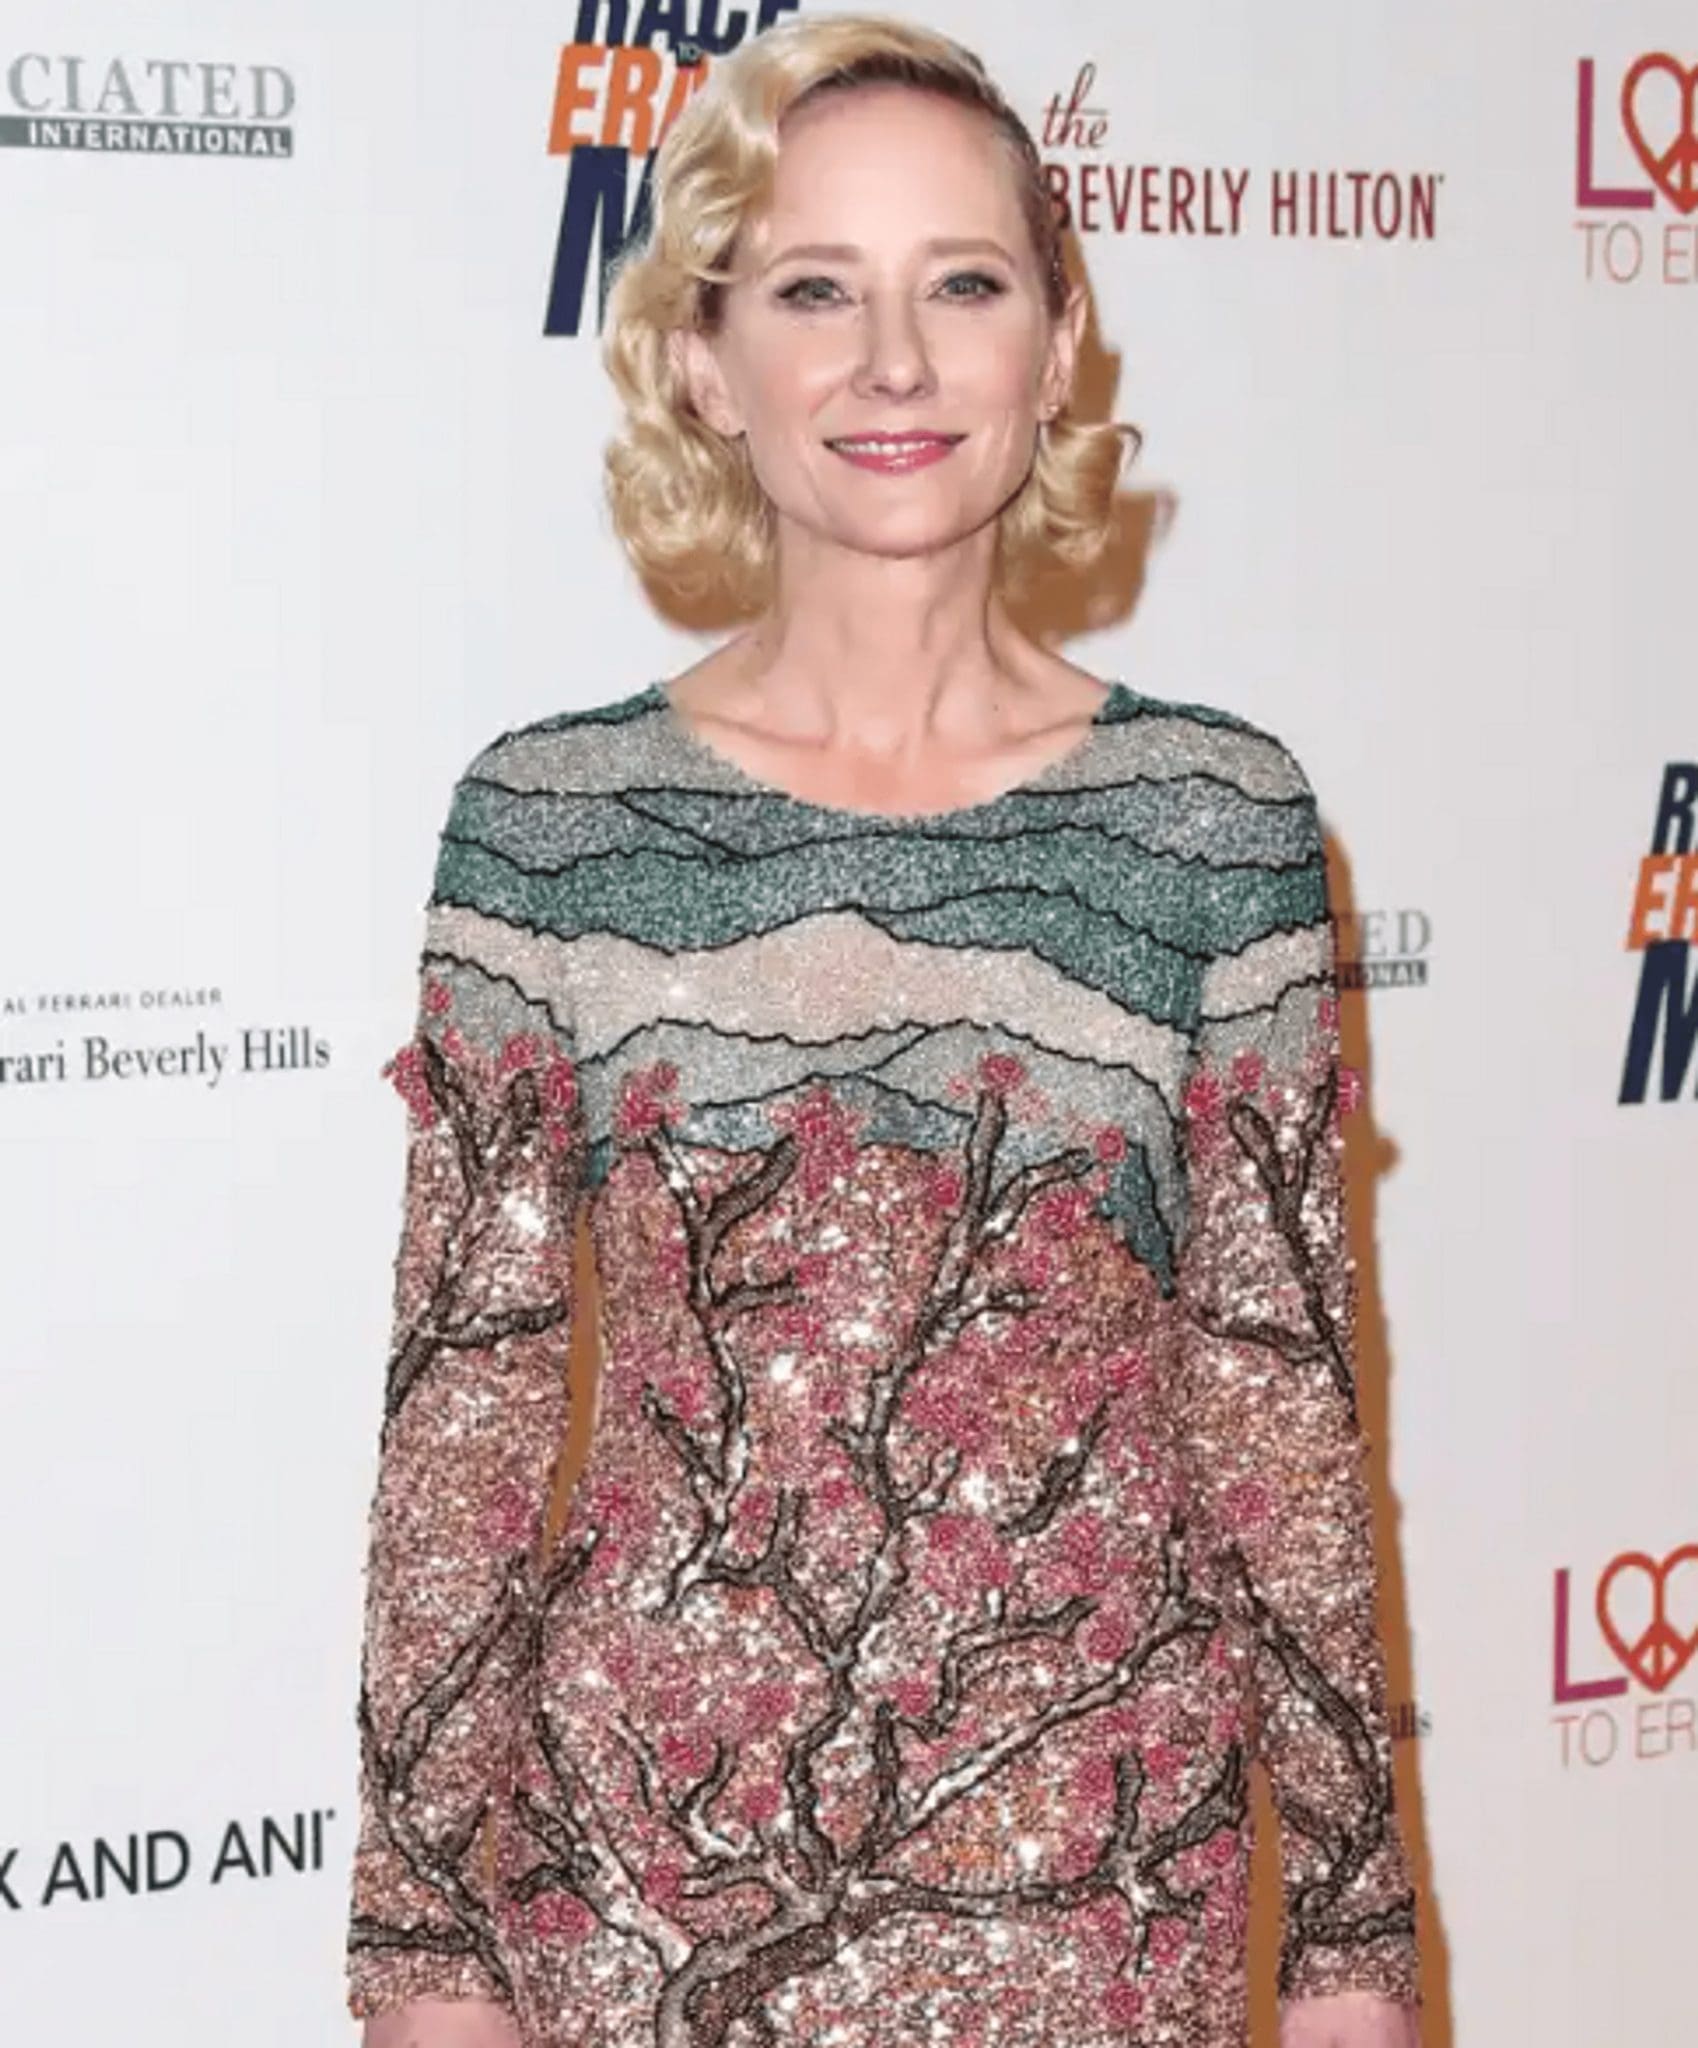 As Organ Donation And Life Support Are Cut Off, Anne Heche Will Get An Honorary Walk